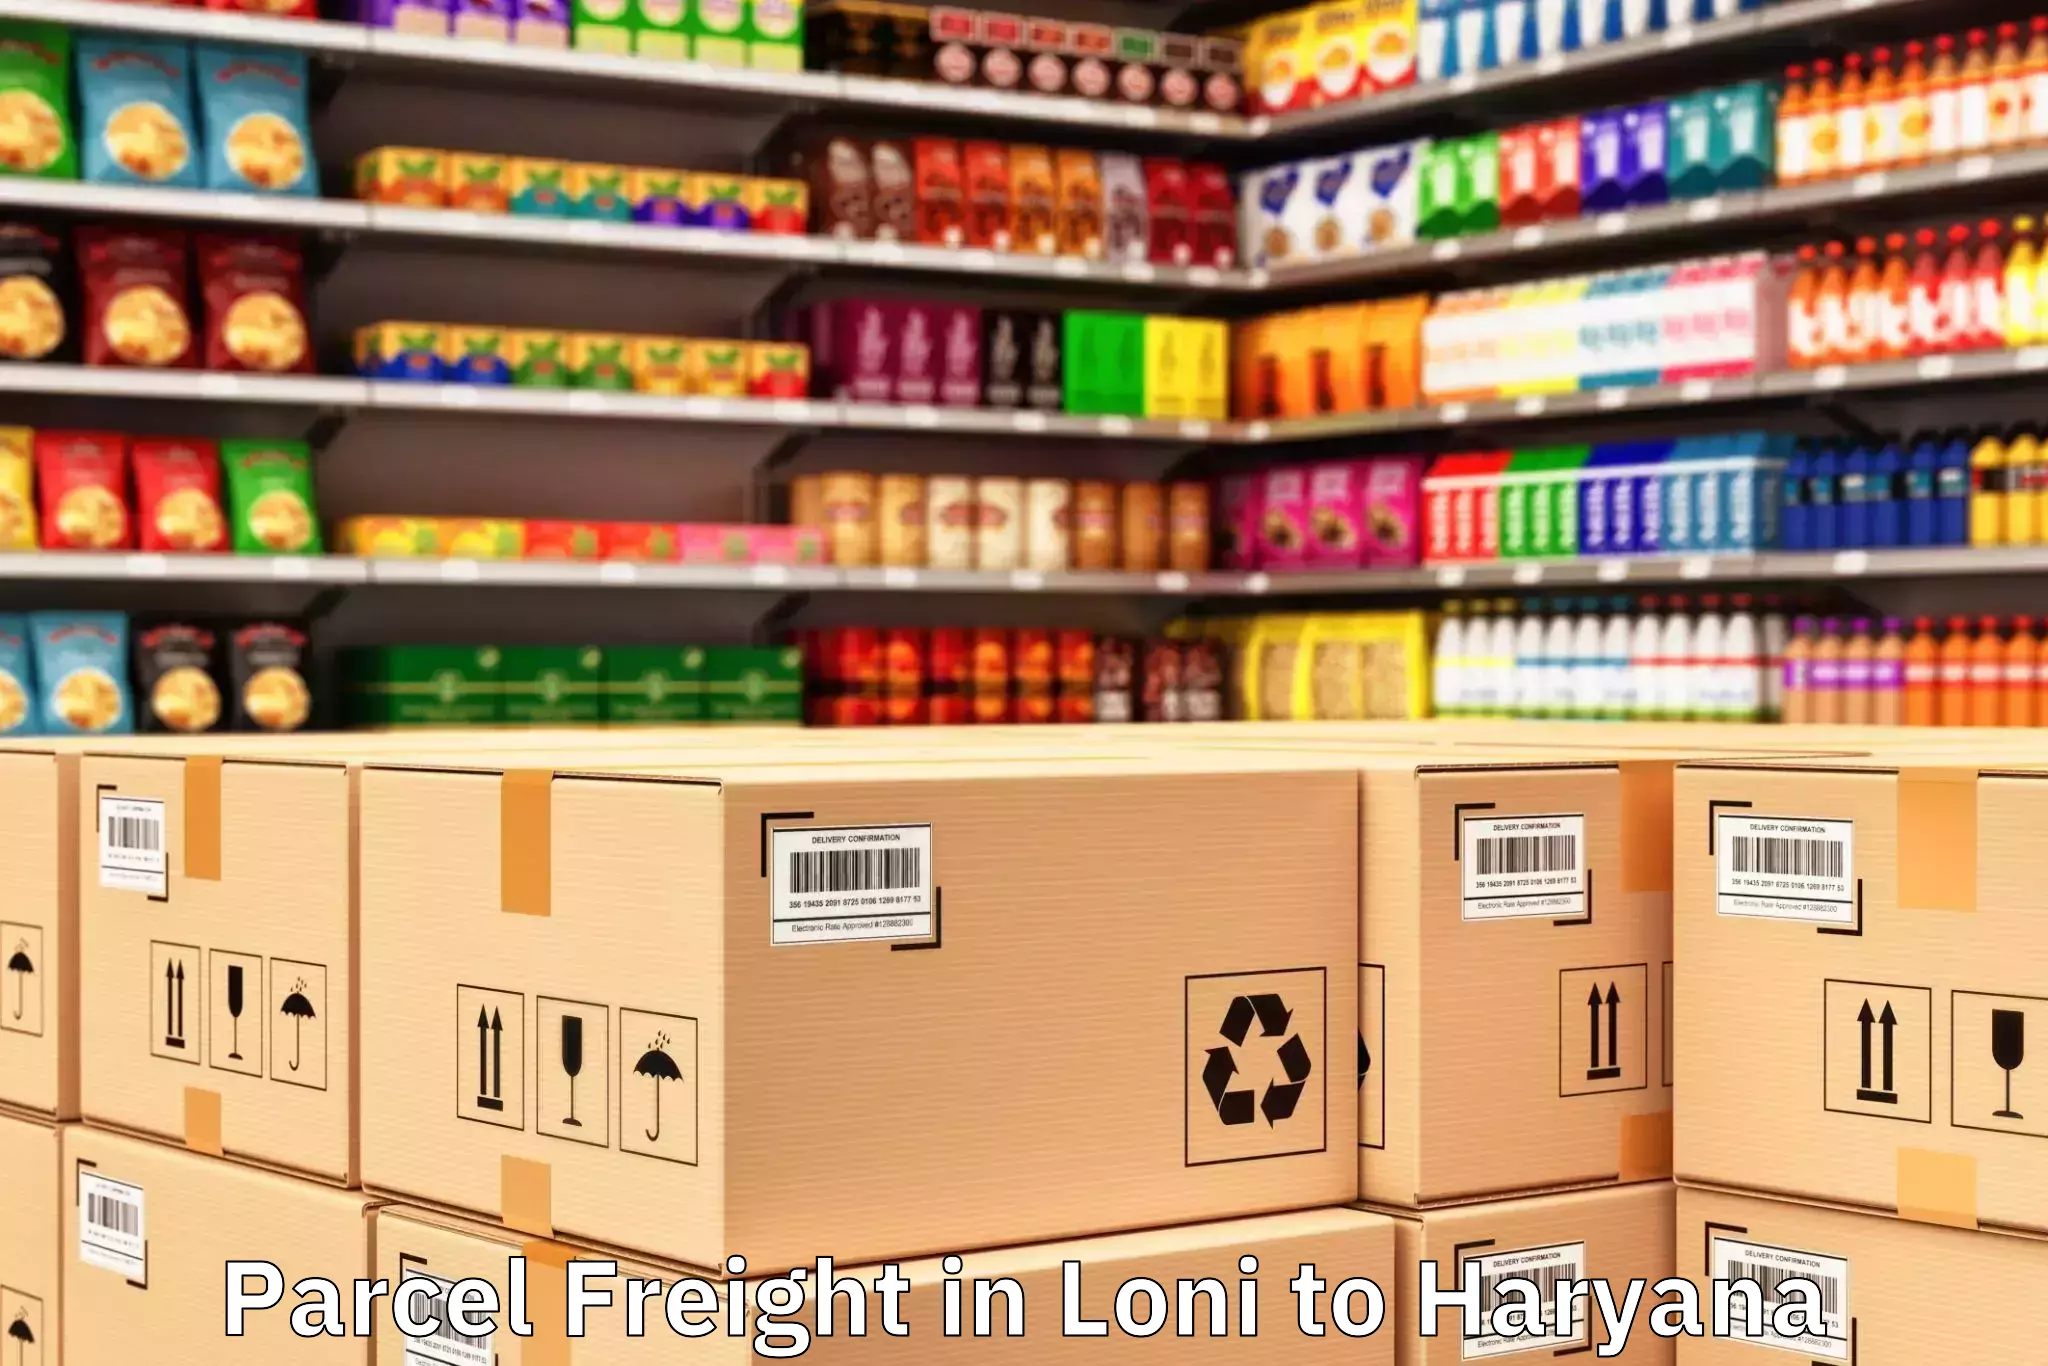 Top Loni to Haryana Parcel Freight Available